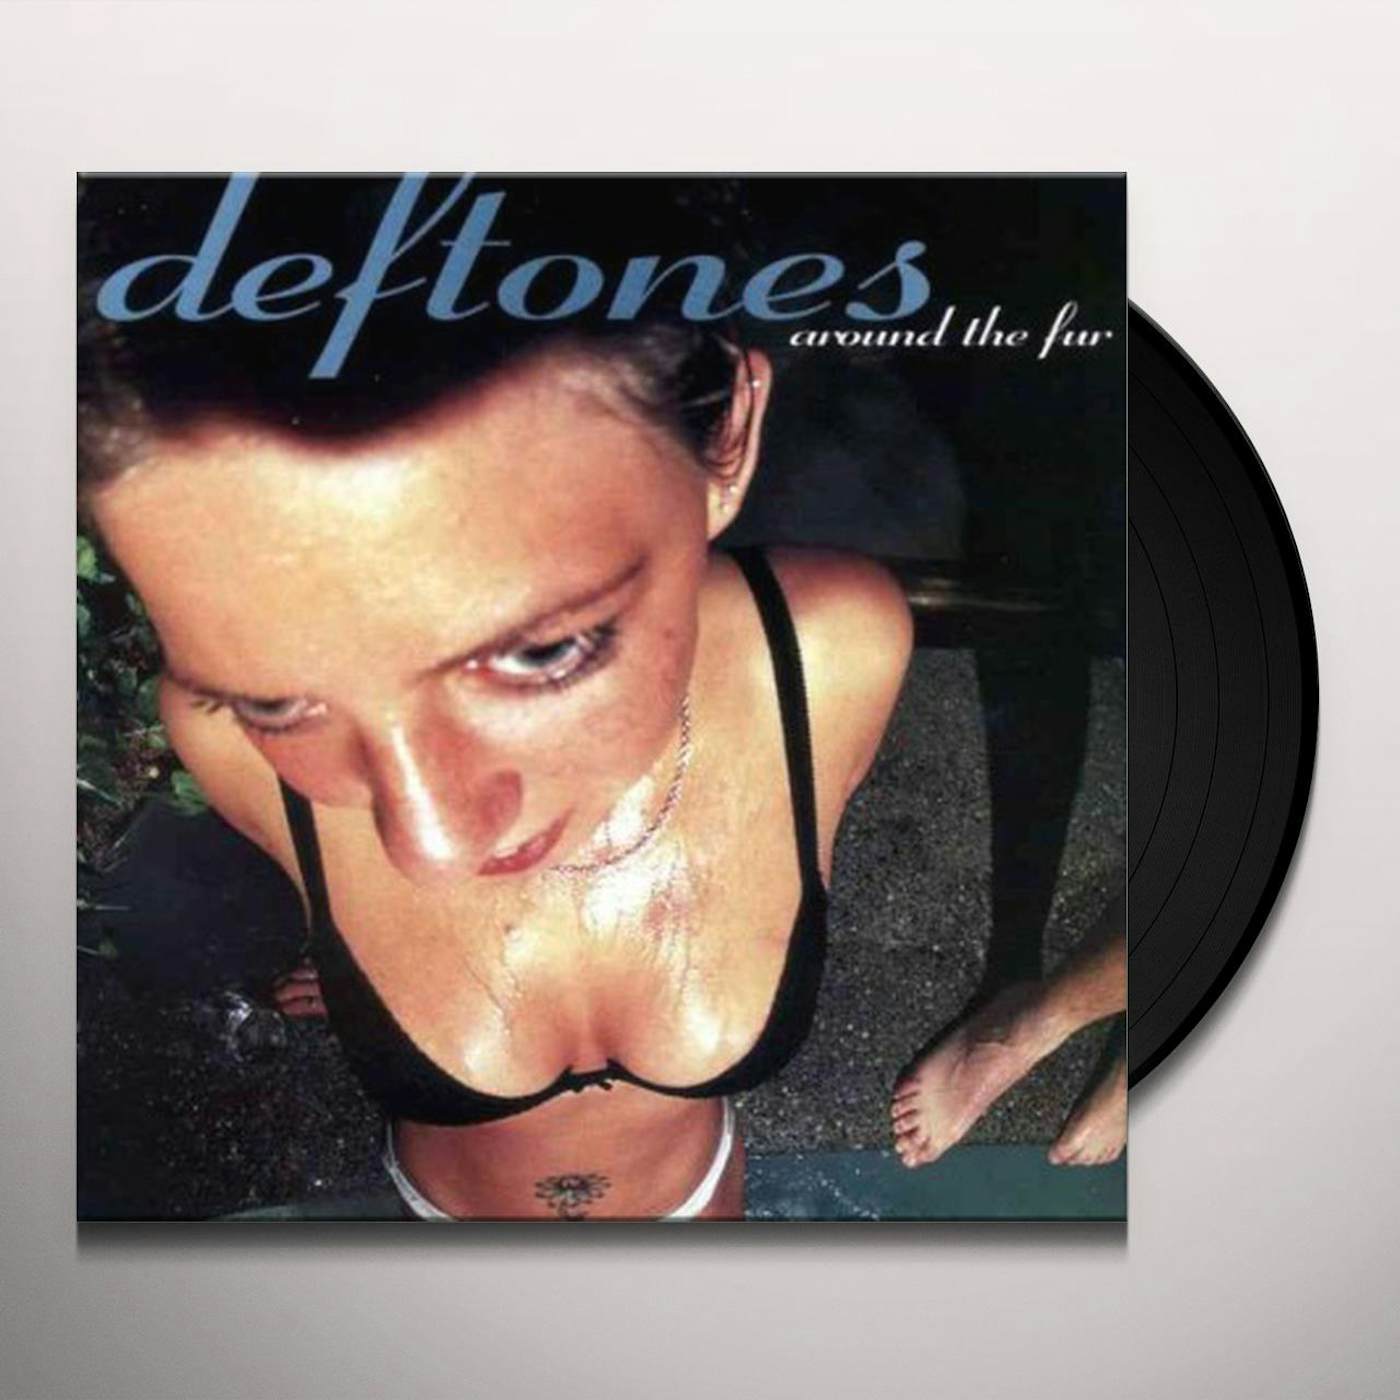 Deftones' 'Around the Fur': The Story Behind the Cover Art